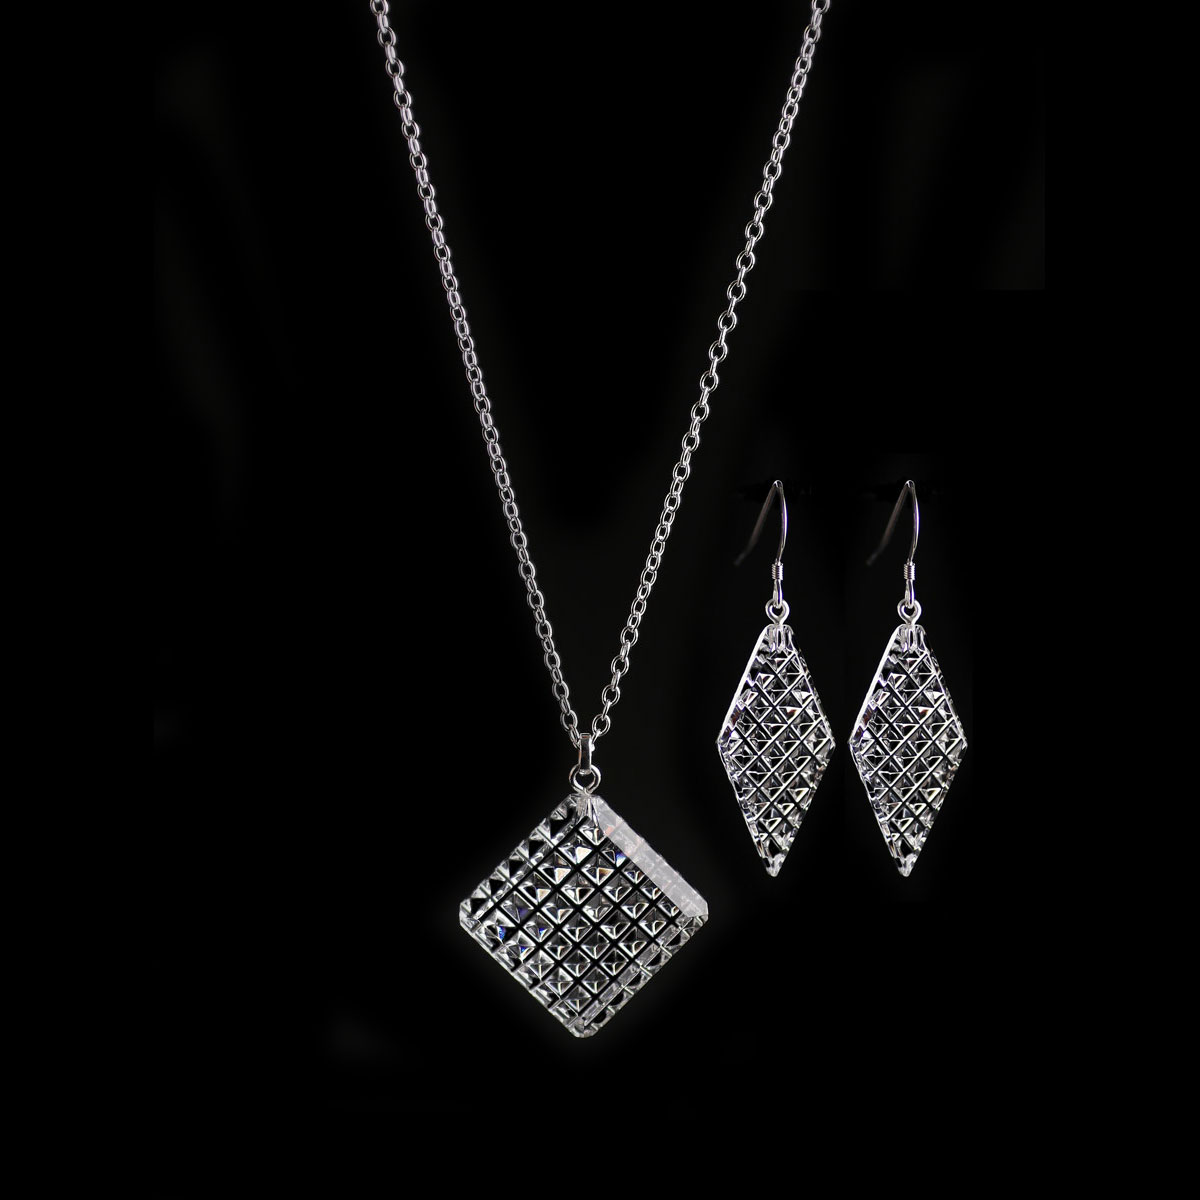 Cashs Ireland, Crystal Diamond Kerry Pendant Necklace and Earring Gift Set